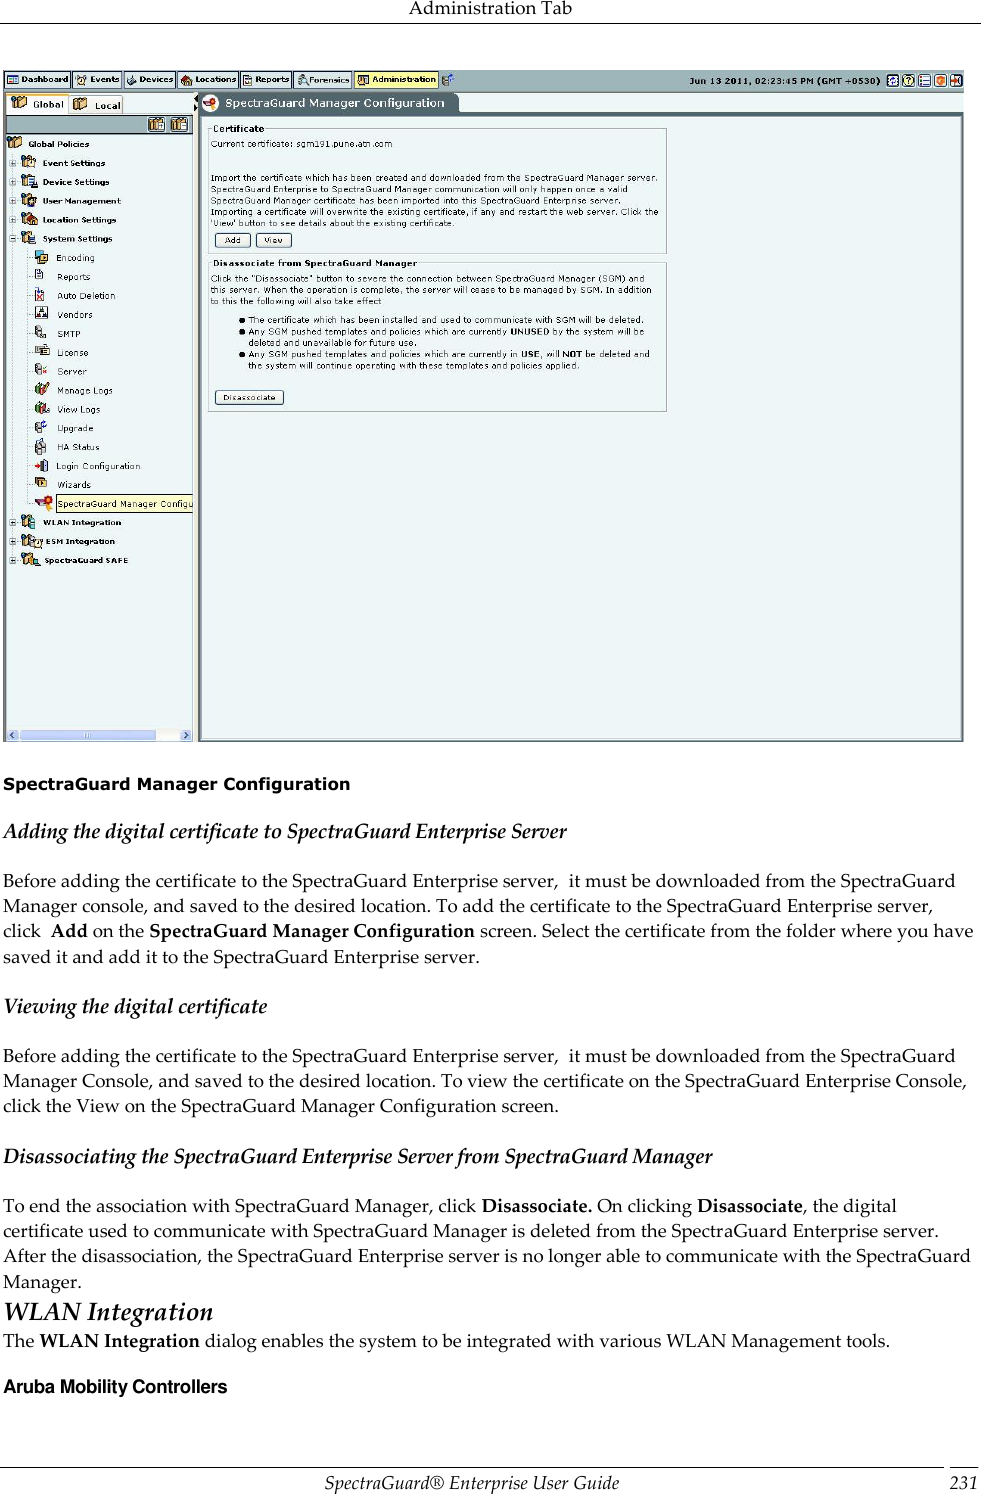 Administration Tab SpectraGuard®  Enterprise User Guide 231    SpectraGuard Manager Configuration Adding the digital certificate to SpectraGuard Enterprise Server Before adding the certificate to the SpectraGuard Enterprise server,  it must be downloaded from the SpectraGuard Manager console, and saved to the desired location. To add the certificate to the SpectraGuard Enterprise server, click  Add on the SpectraGuard Manager Configuration screen. Select the certificate from the folder where you have saved it and add it to the SpectraGuard Enterprise server. Viewing the digital certificate Before adding the certificate to the SpectraGuard Enterprise server,  it must be downloaded from the SpectraGuard Manager Console, and saved to the desired location. To view the certificate on the SpectraGuard Enterprise Console, click the View on the SpectraGuard Manager Configuration screen. Disassociating the SpectraGuard Enterprise Server from SpectraGuard Manager To end the association with SpectraGuard Manager, click Disassociate. On clicking Disassociate, the digital certificate used to communicate with SpectraGuard Manager is deleted from the SpectraGuard Enterprise server. After the disassociation, the SpectraGuard Enterprise server is no longer able to communicate with the SpectraGuard Manager. WLAN Integration The WLAN Integration dialog enables the system to be integrated with various WLAN Management tools. Aruba Mobility Controllers 